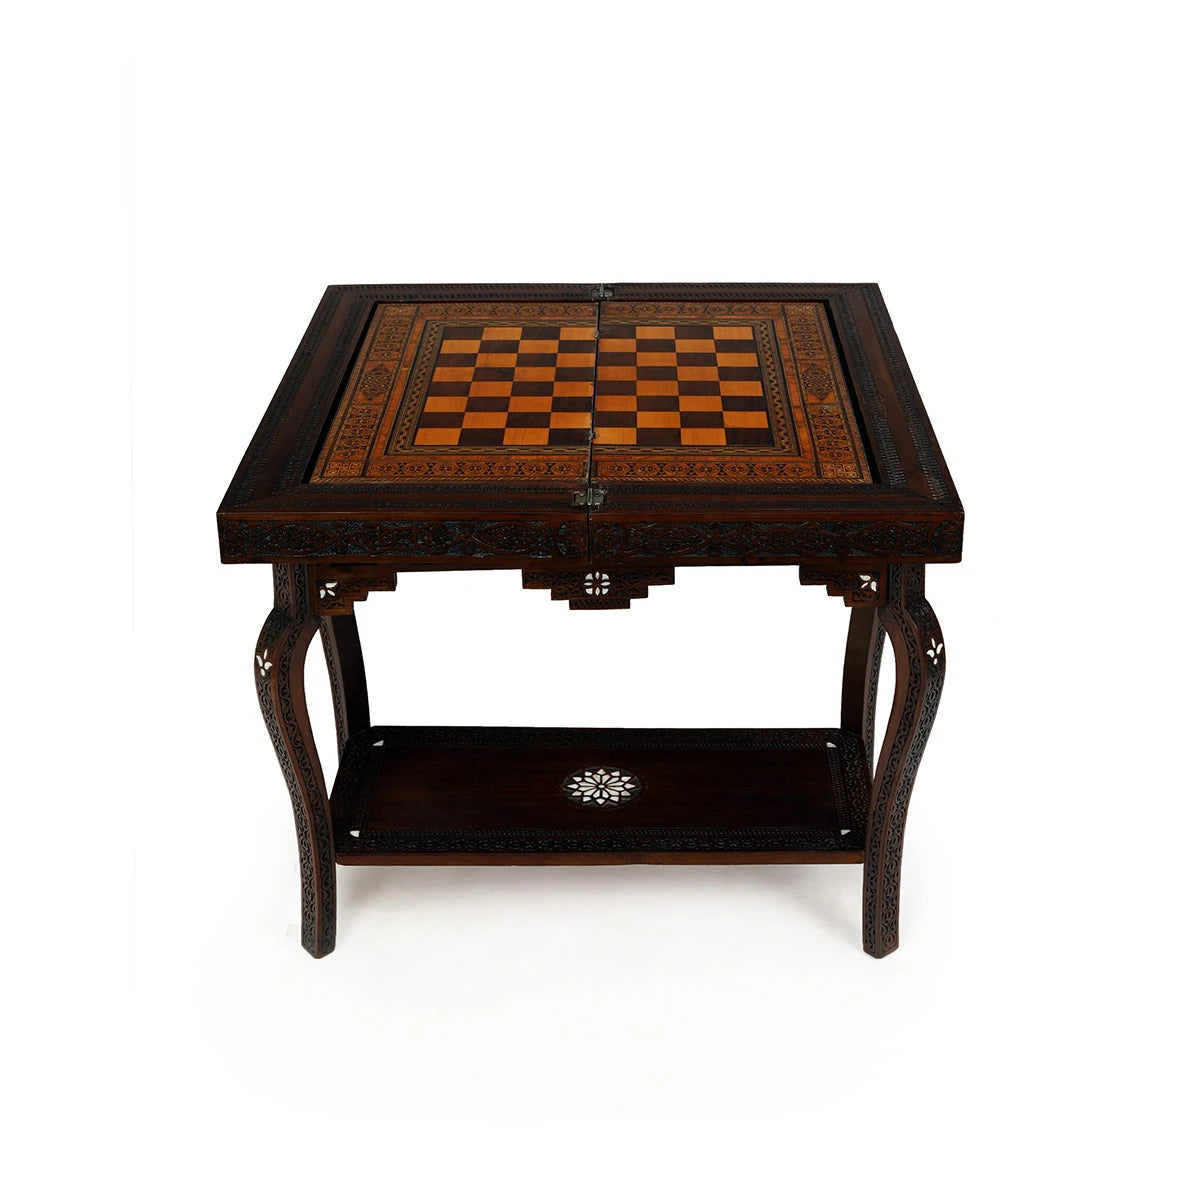 Handmade Traditional Arabian 3 in 1 Multi-Purpose Foldable Chess / Shatranj Table with a Storage Tier